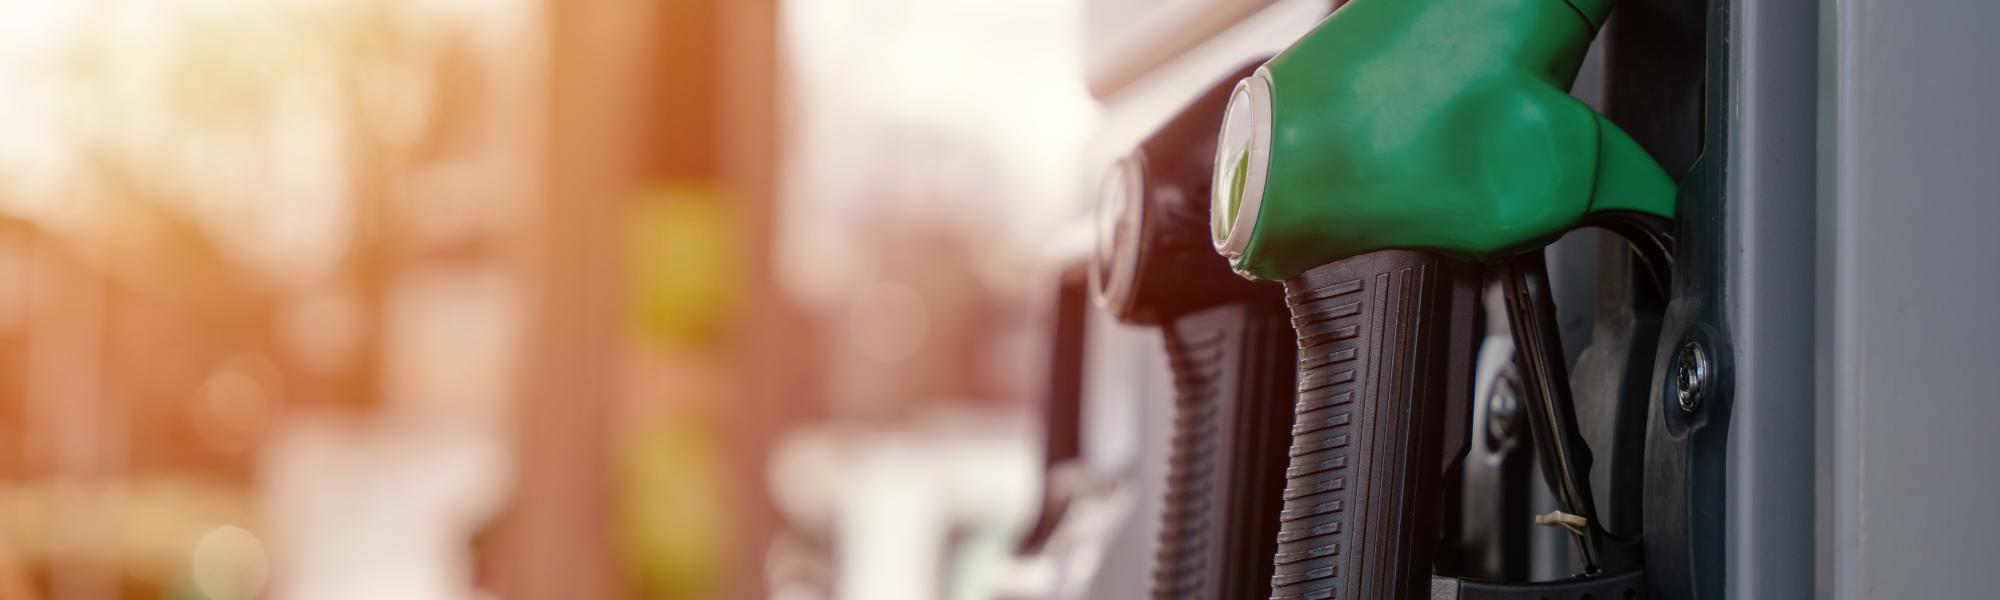 Fuel prices in the EU: Understanding the future